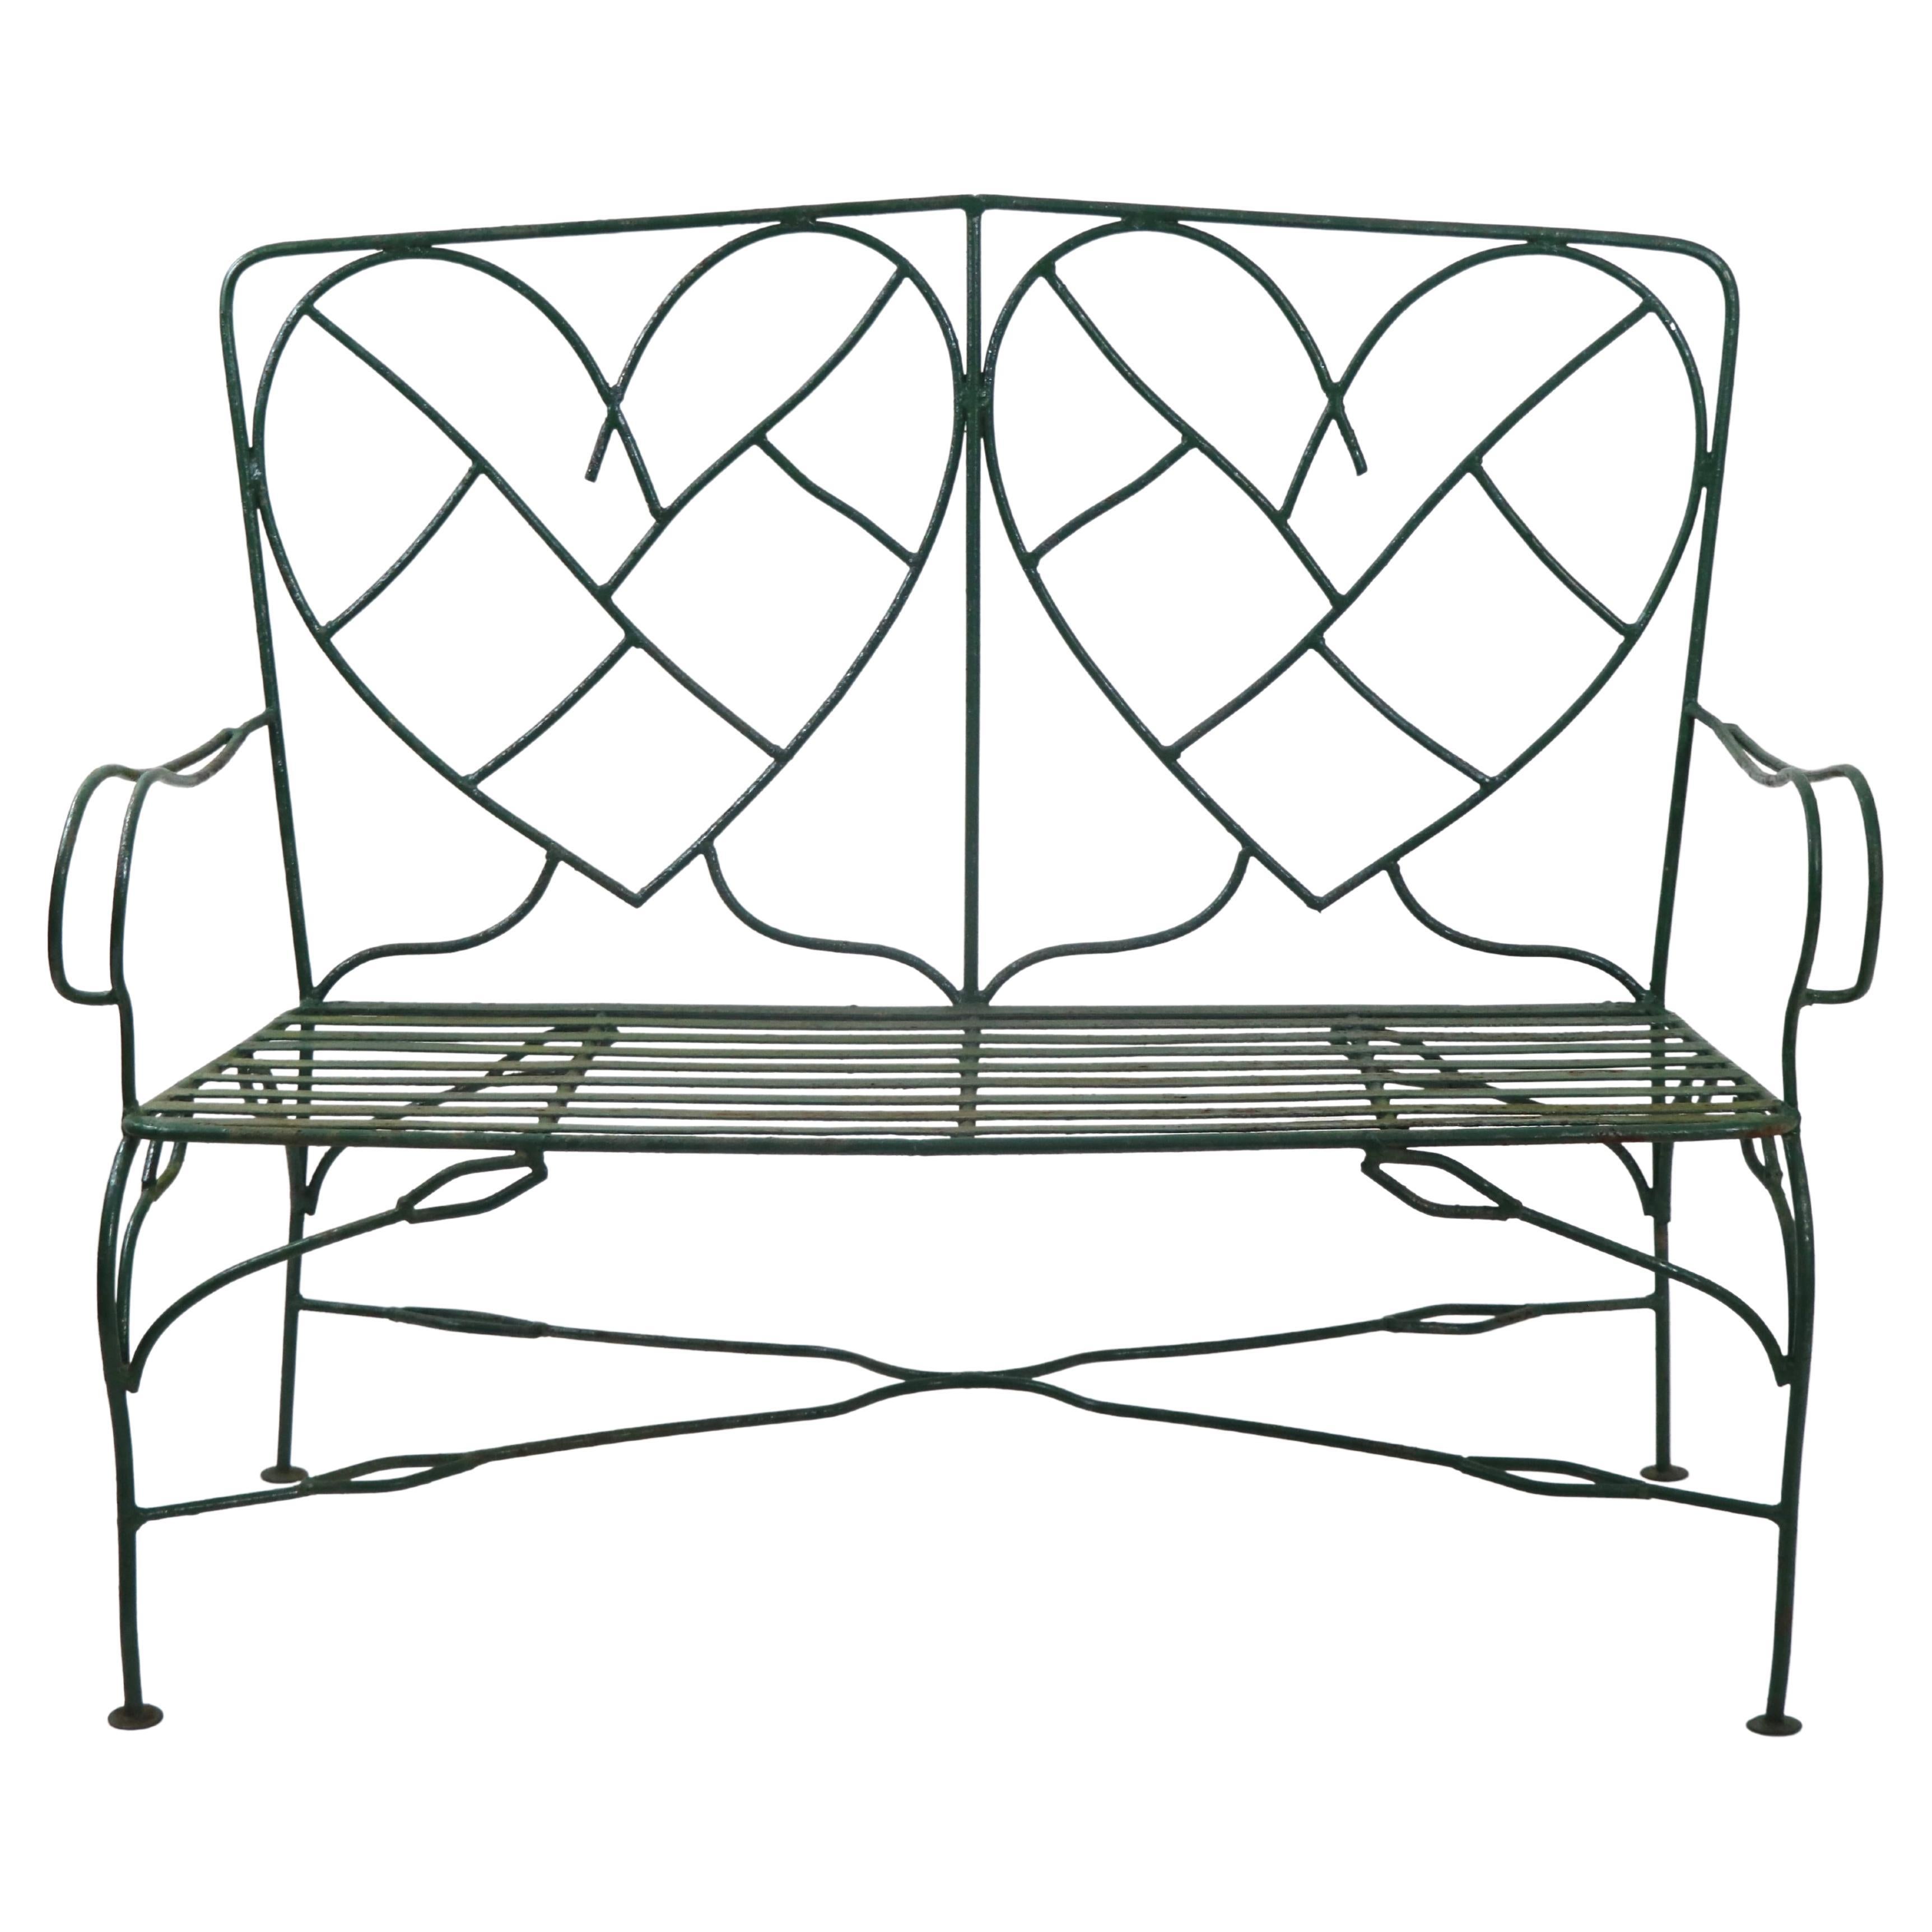 Hand Wrought Iron Settee Bench W Decorative Heart Shaped Metalwork Backrest 